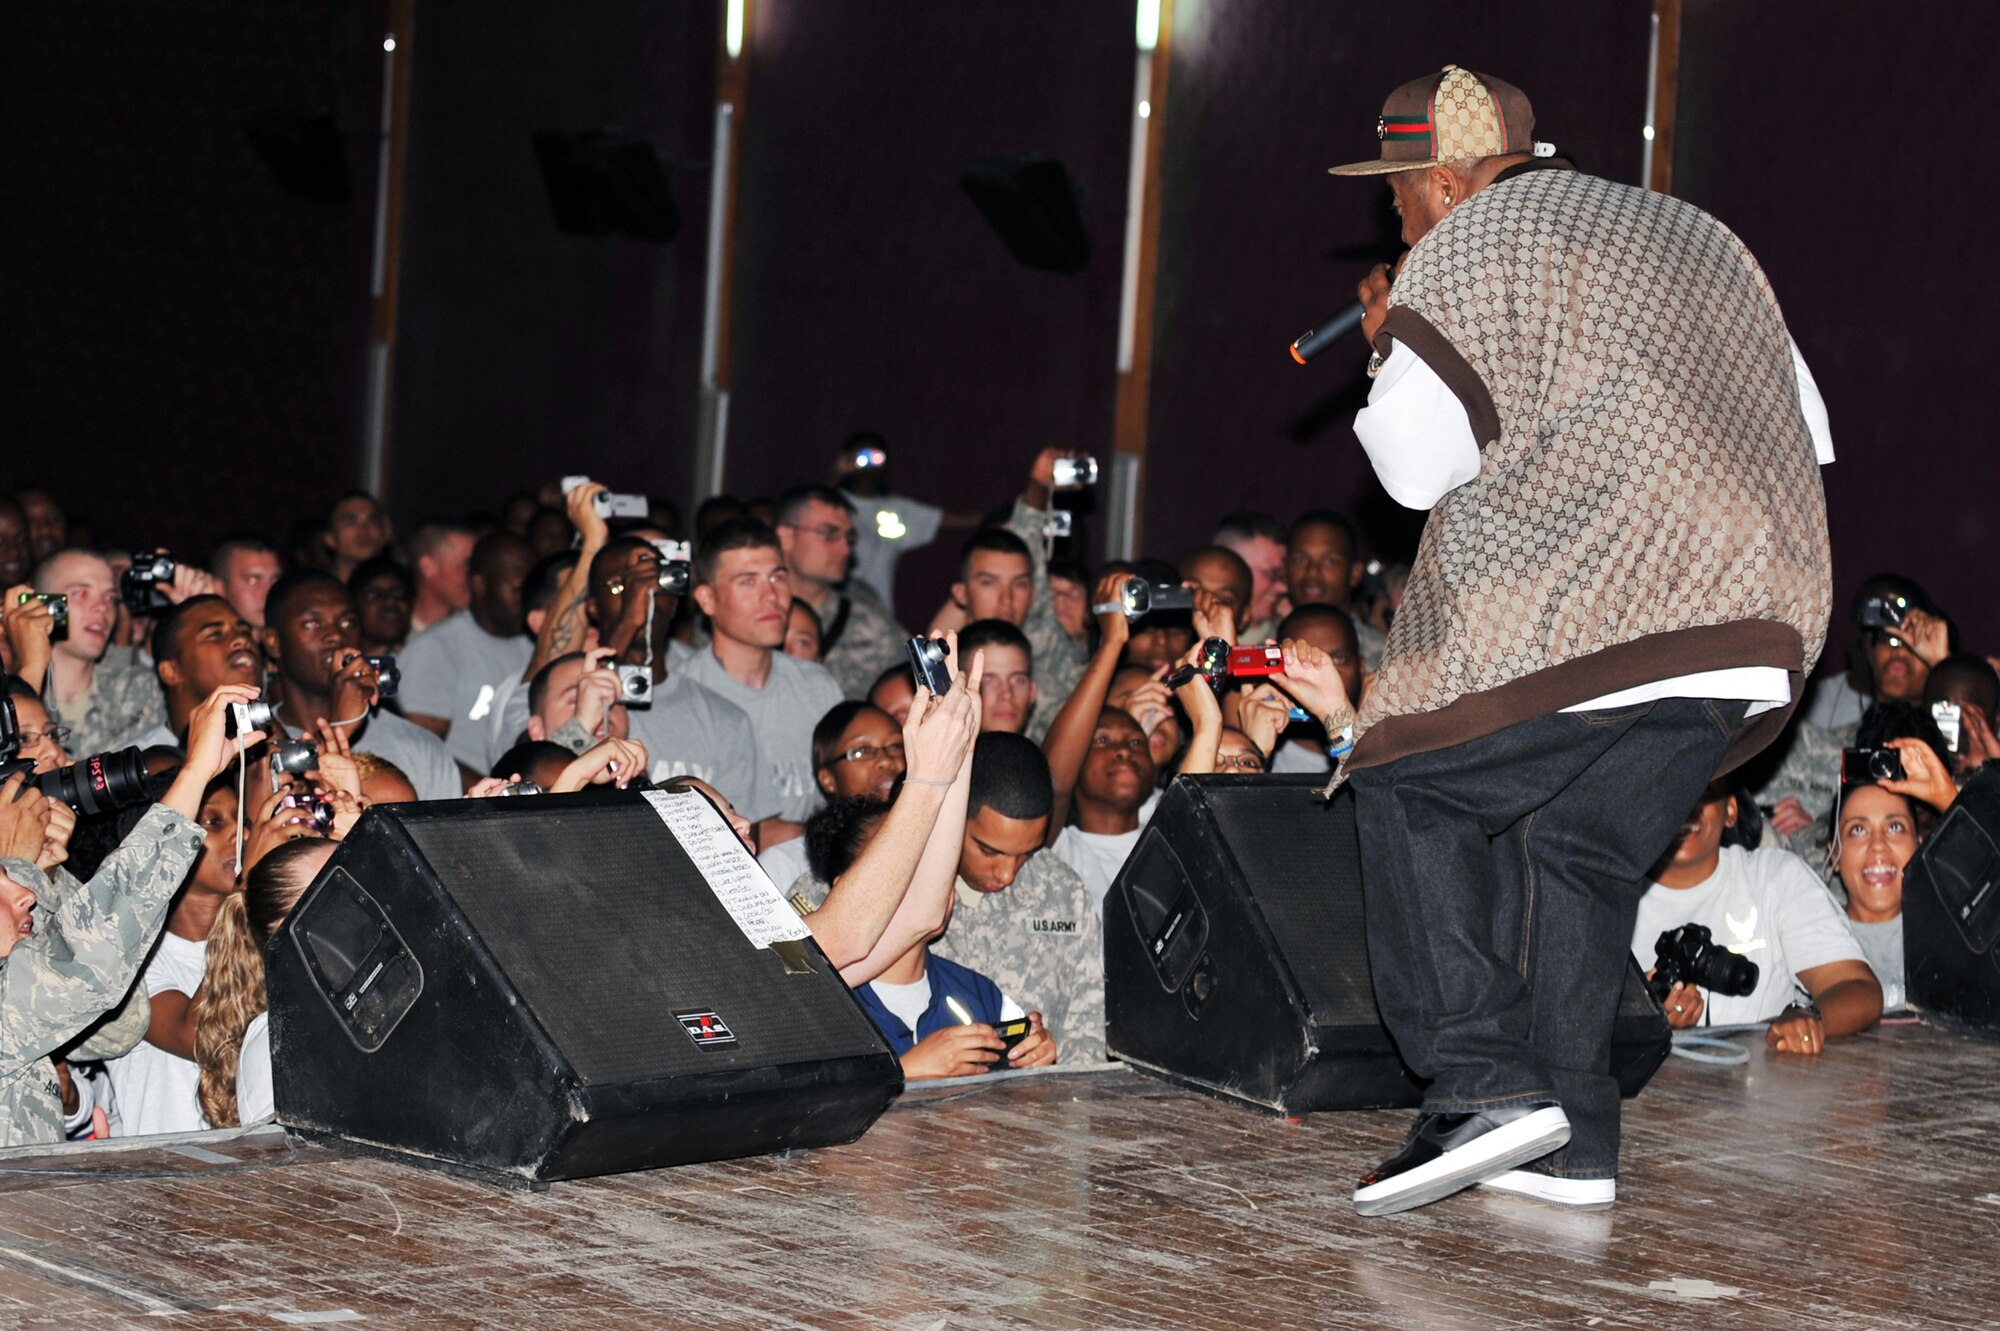 Twista performs for more than 600 deployed servicemembers and contractors at Joint Base Balad, Iraq, April 15, 2010. After the concert, audience members lined up for a meet-and-greet and autograph session with the artist. (U.S. Air Force photo/Senior Airman Brittany Y. Bateman/Released)